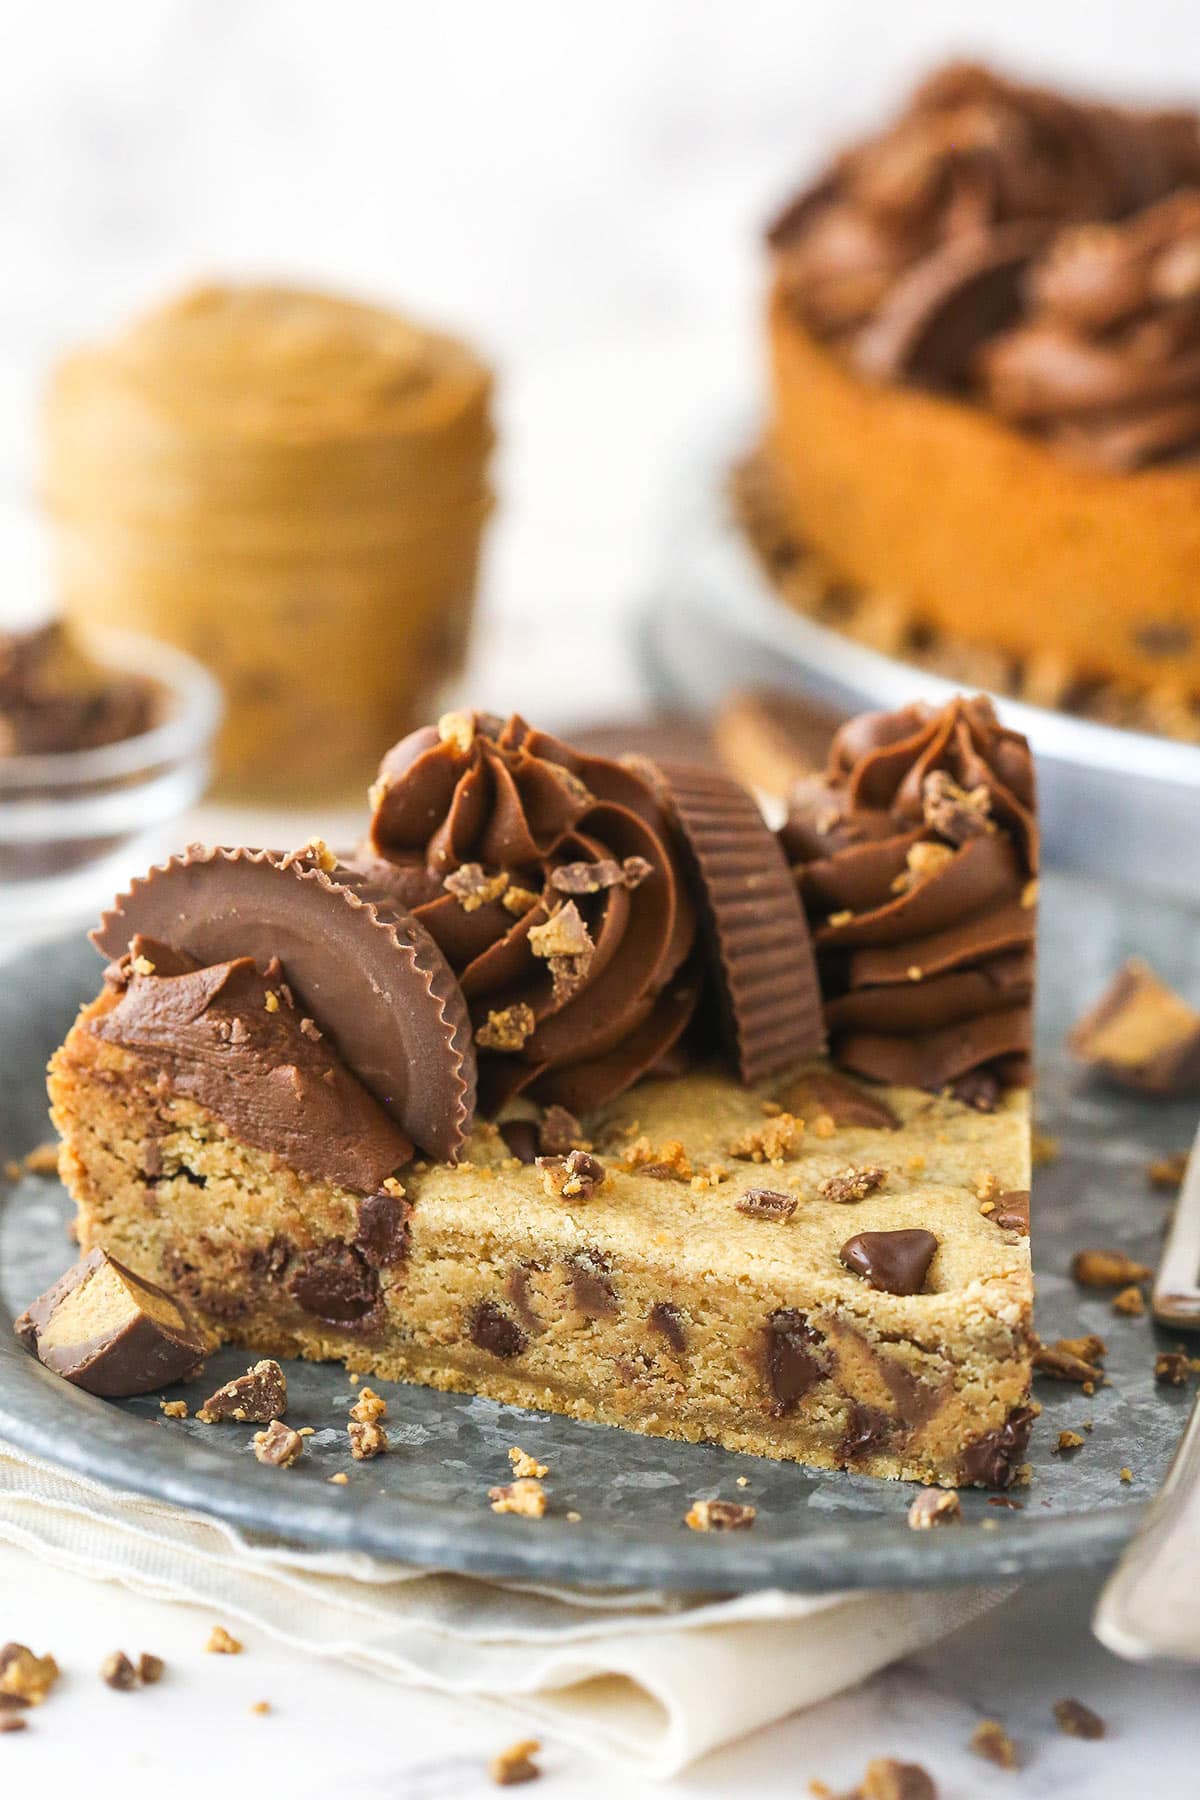 A slice of Reese's peanut butter cookie cake on a plate.